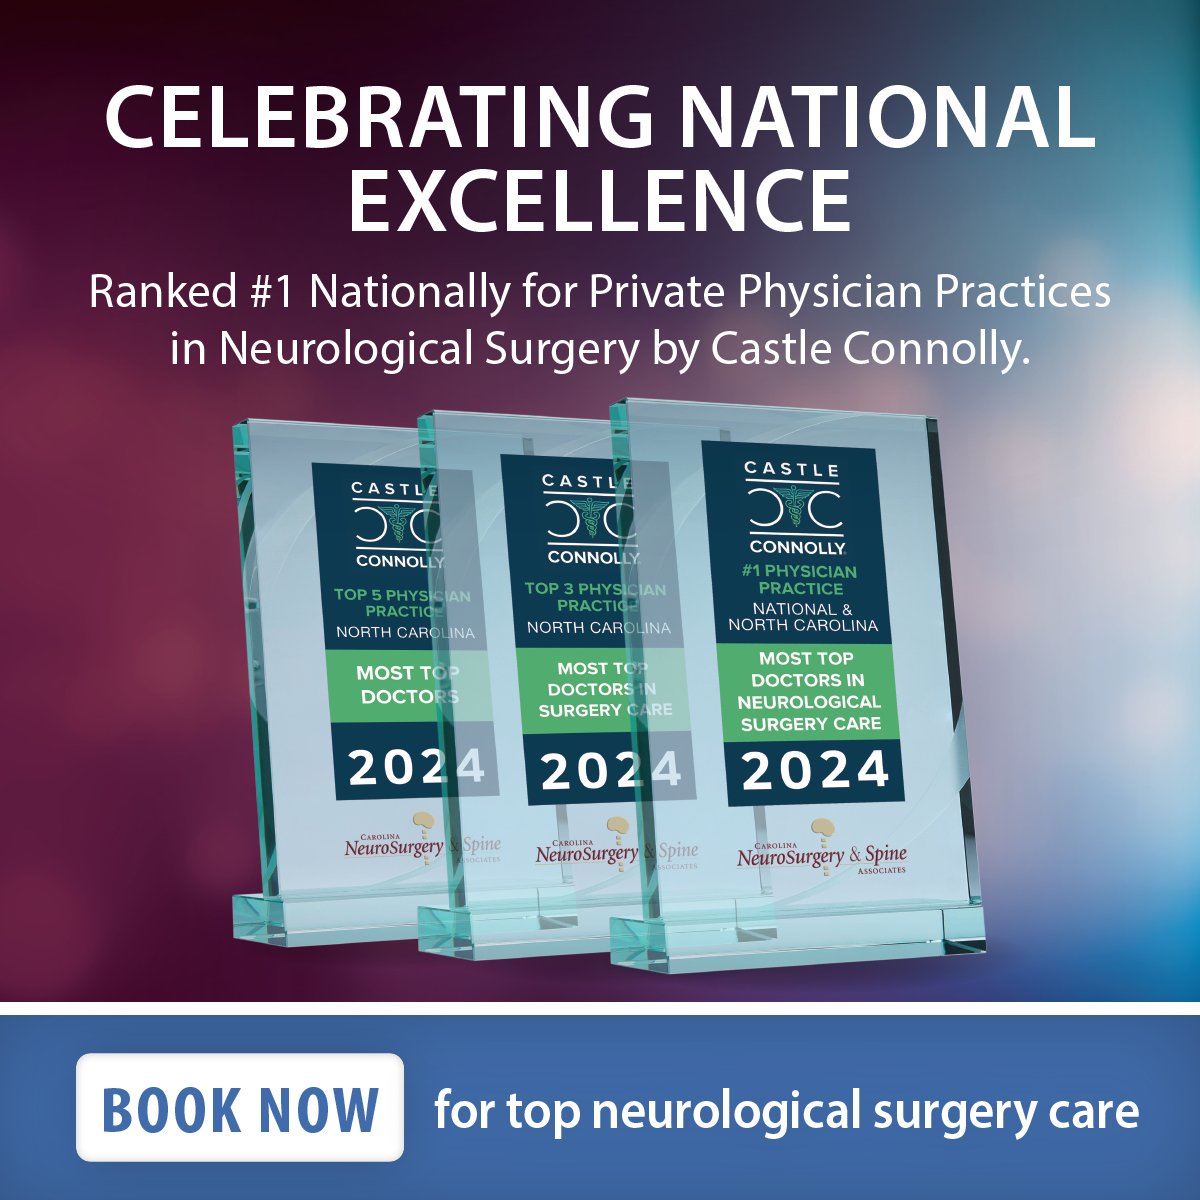 Thrilled to be ranked #1 by Castle Connolly for Private Physician Practices in Neurological Surgery locally and nationally. This honor reflects our team's dedication to patient care and leadership. cnsa.com/media/celebrat…  #ExcellenceInCare #CastleConnolly2024 #Neurosurgery